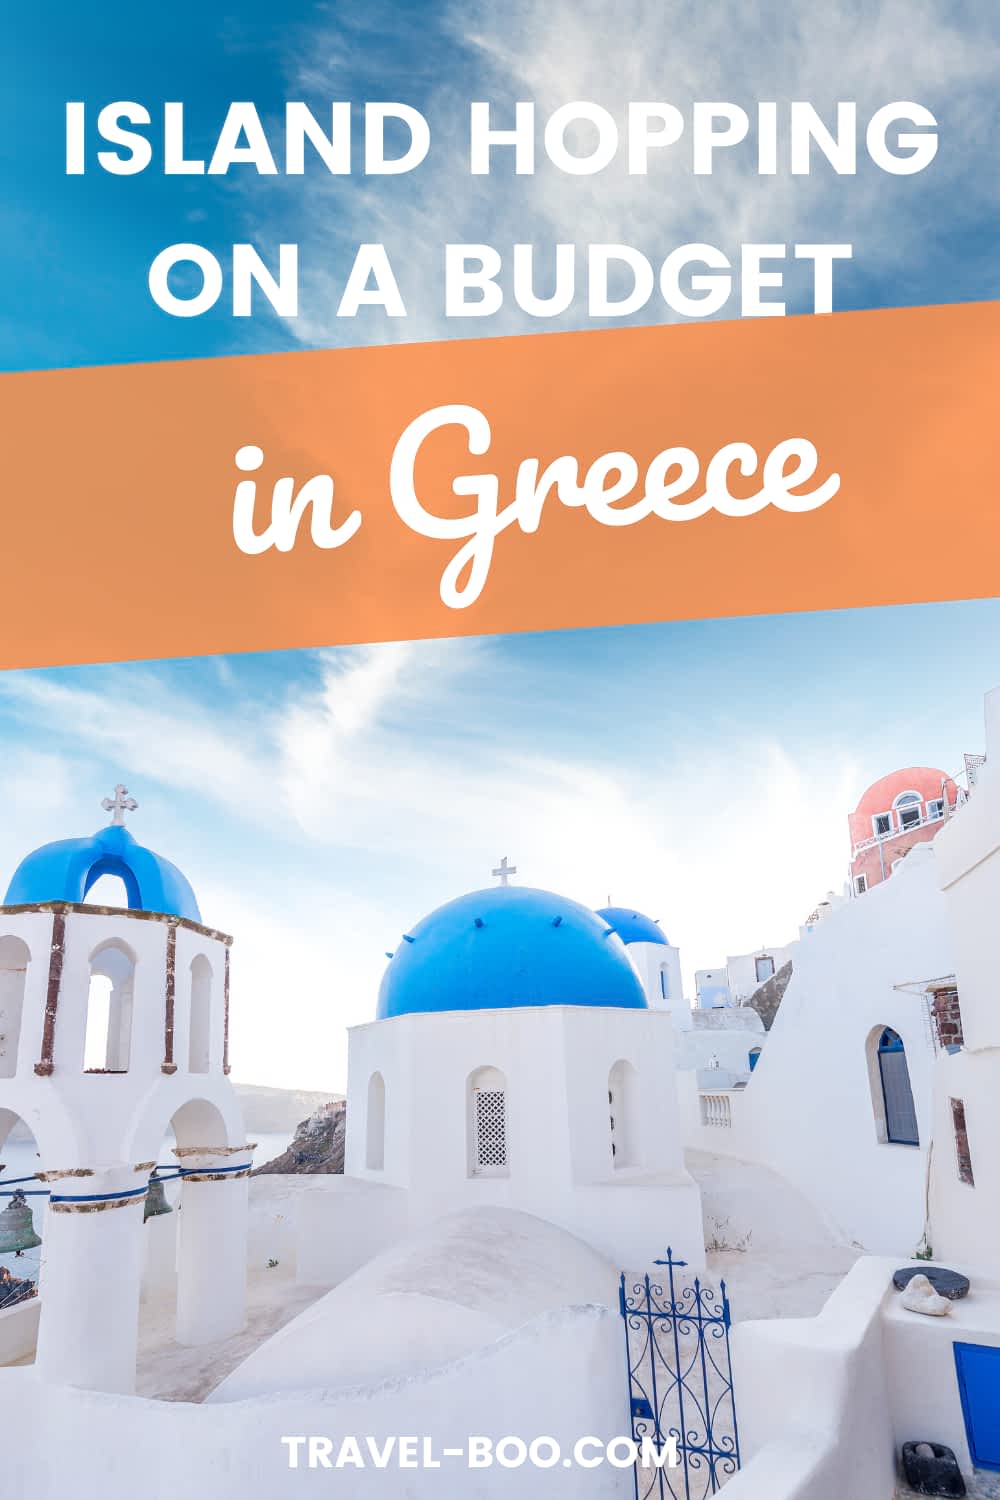 Want to plan the perfect Greek Island hopping holiday? Read our guide on how to do so on a budget! Greece Travel, Greece Travel Guide, Greece Travel Islands, Greece Travel Tips, Mykonos Travel, Santorini Travel, Greece Vacation. #greecetravel #greecetravelislands #greecetraveltips